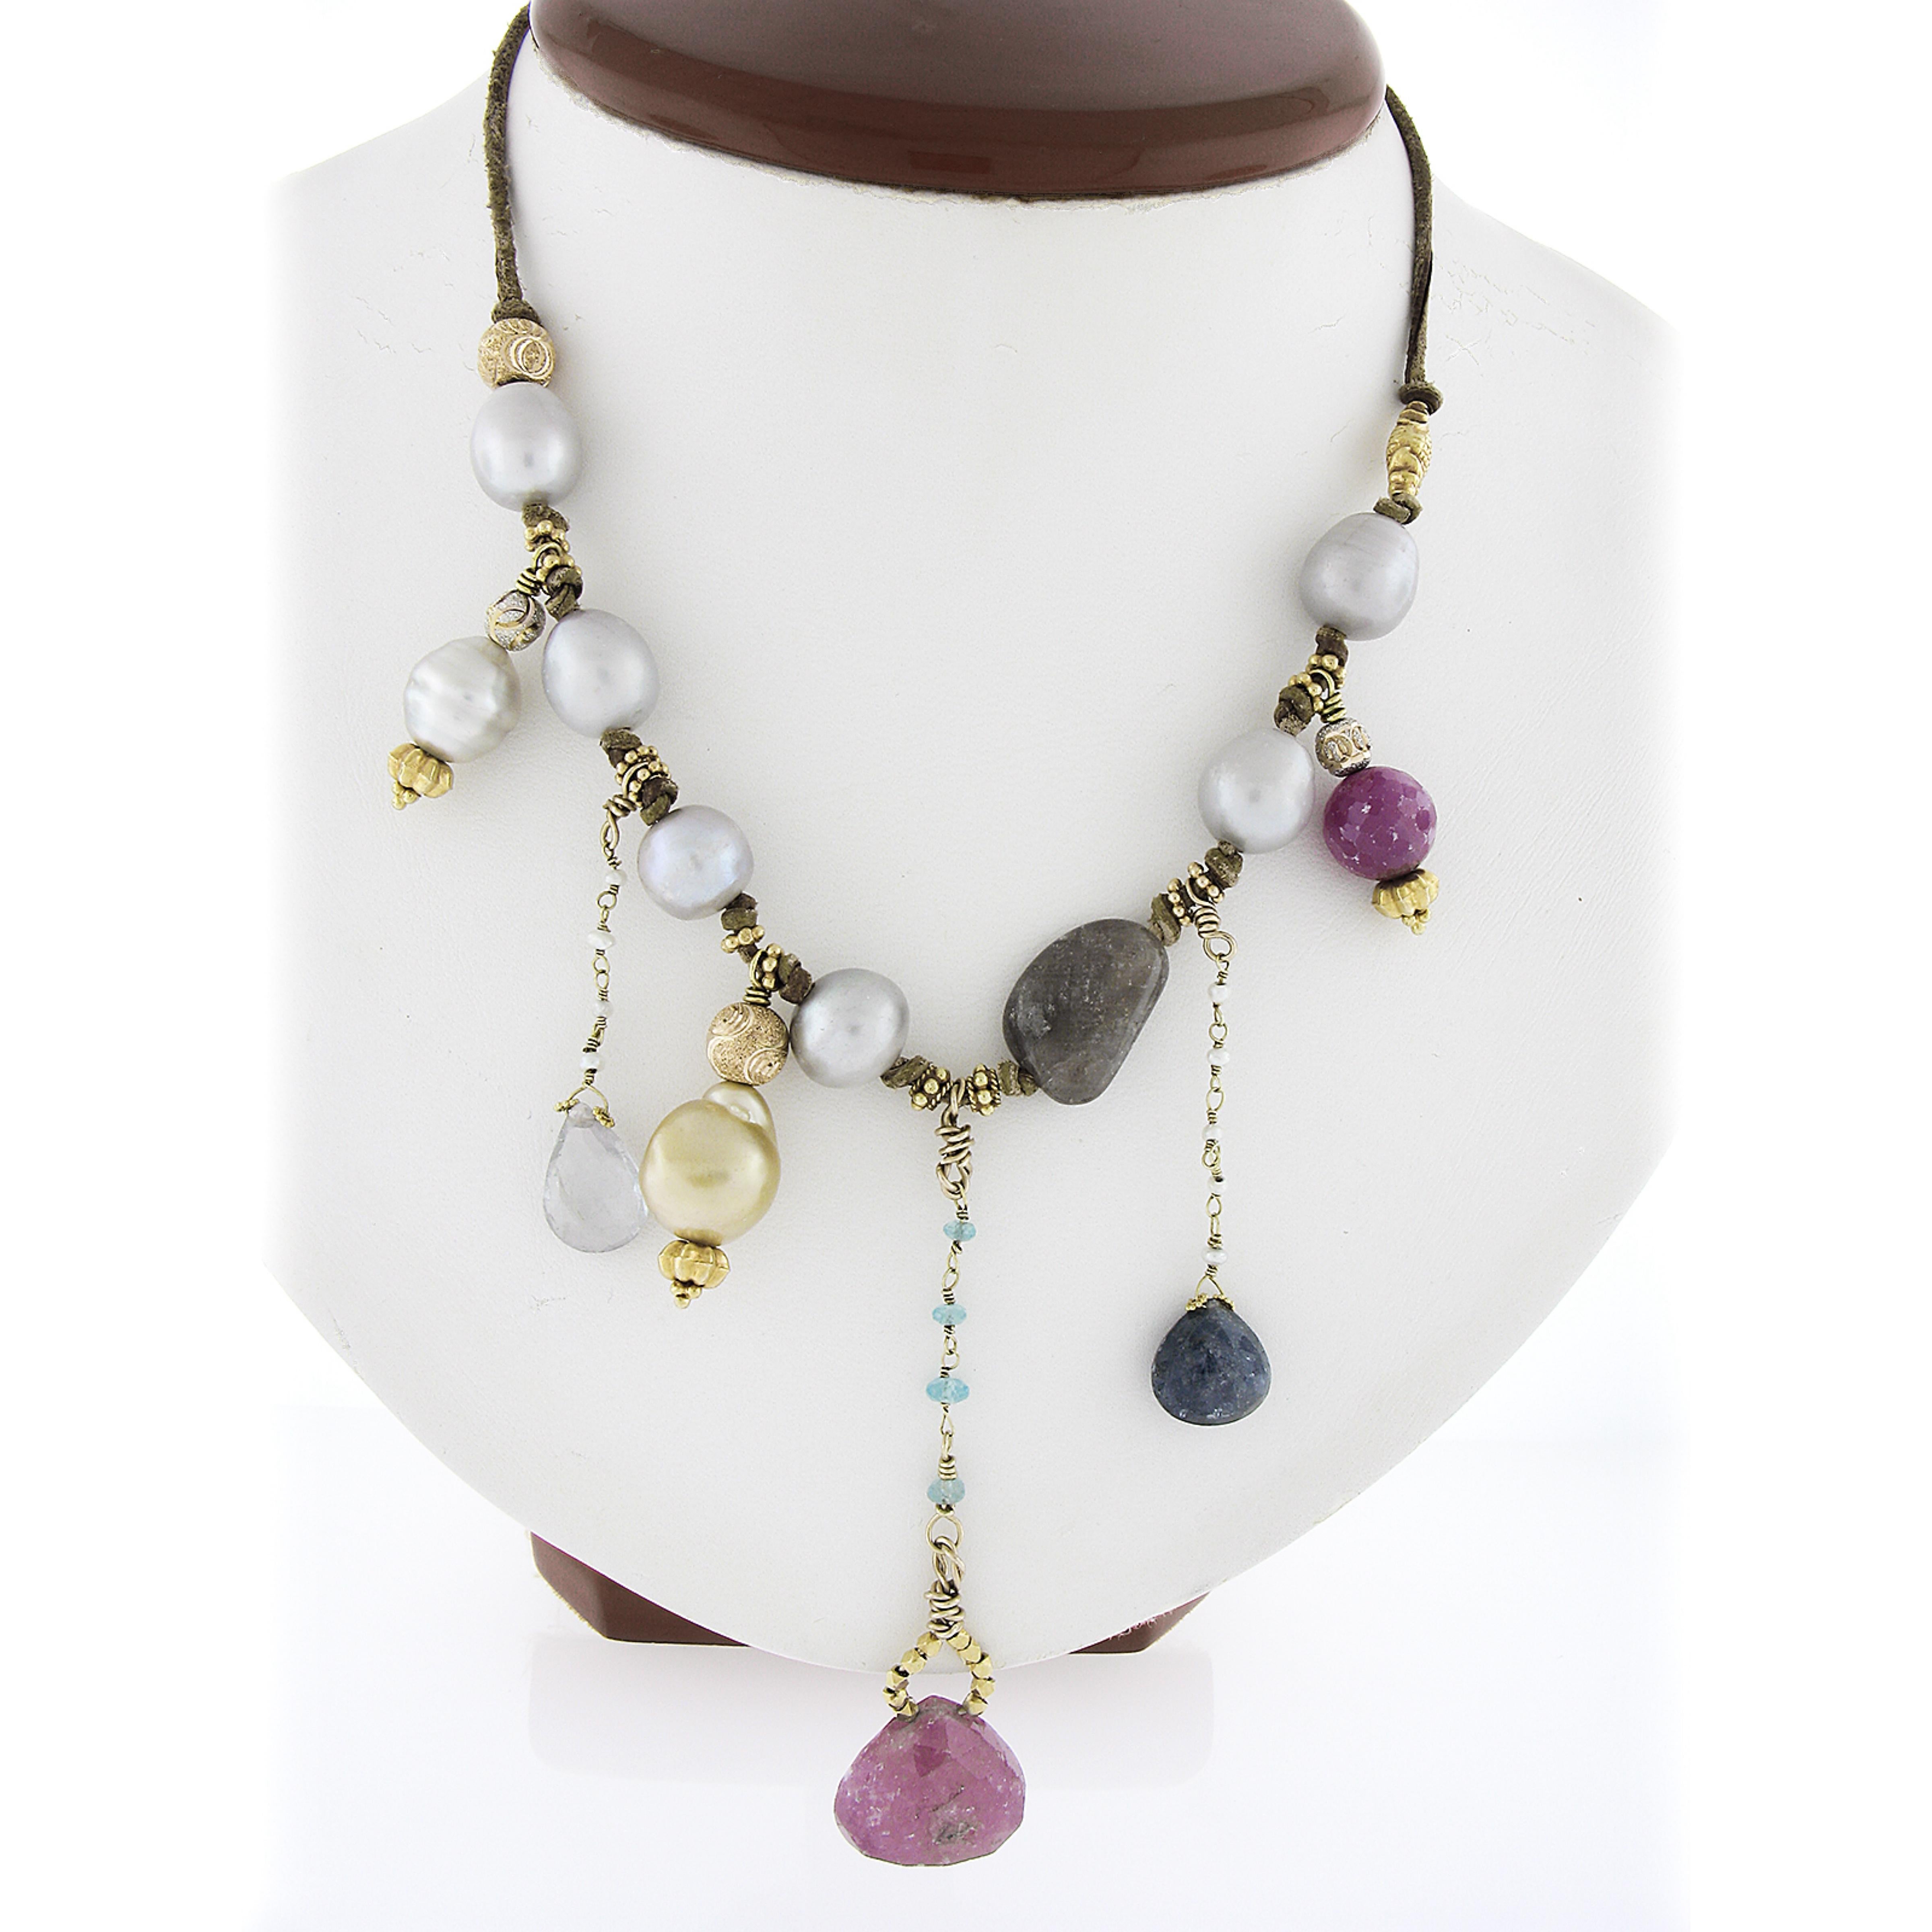 --Stone(s):--
Numerous Genuine Cultured Pearls & Natural Genuine Gemstones - Multi Shapes- Strung Set - Multi Colors

Material: 18k Yellow Gold Beads & Clasp w/ Leather Cord
Weight: 36.41 Grams (gross)
Chain Type: Dark & Light Brown Leather